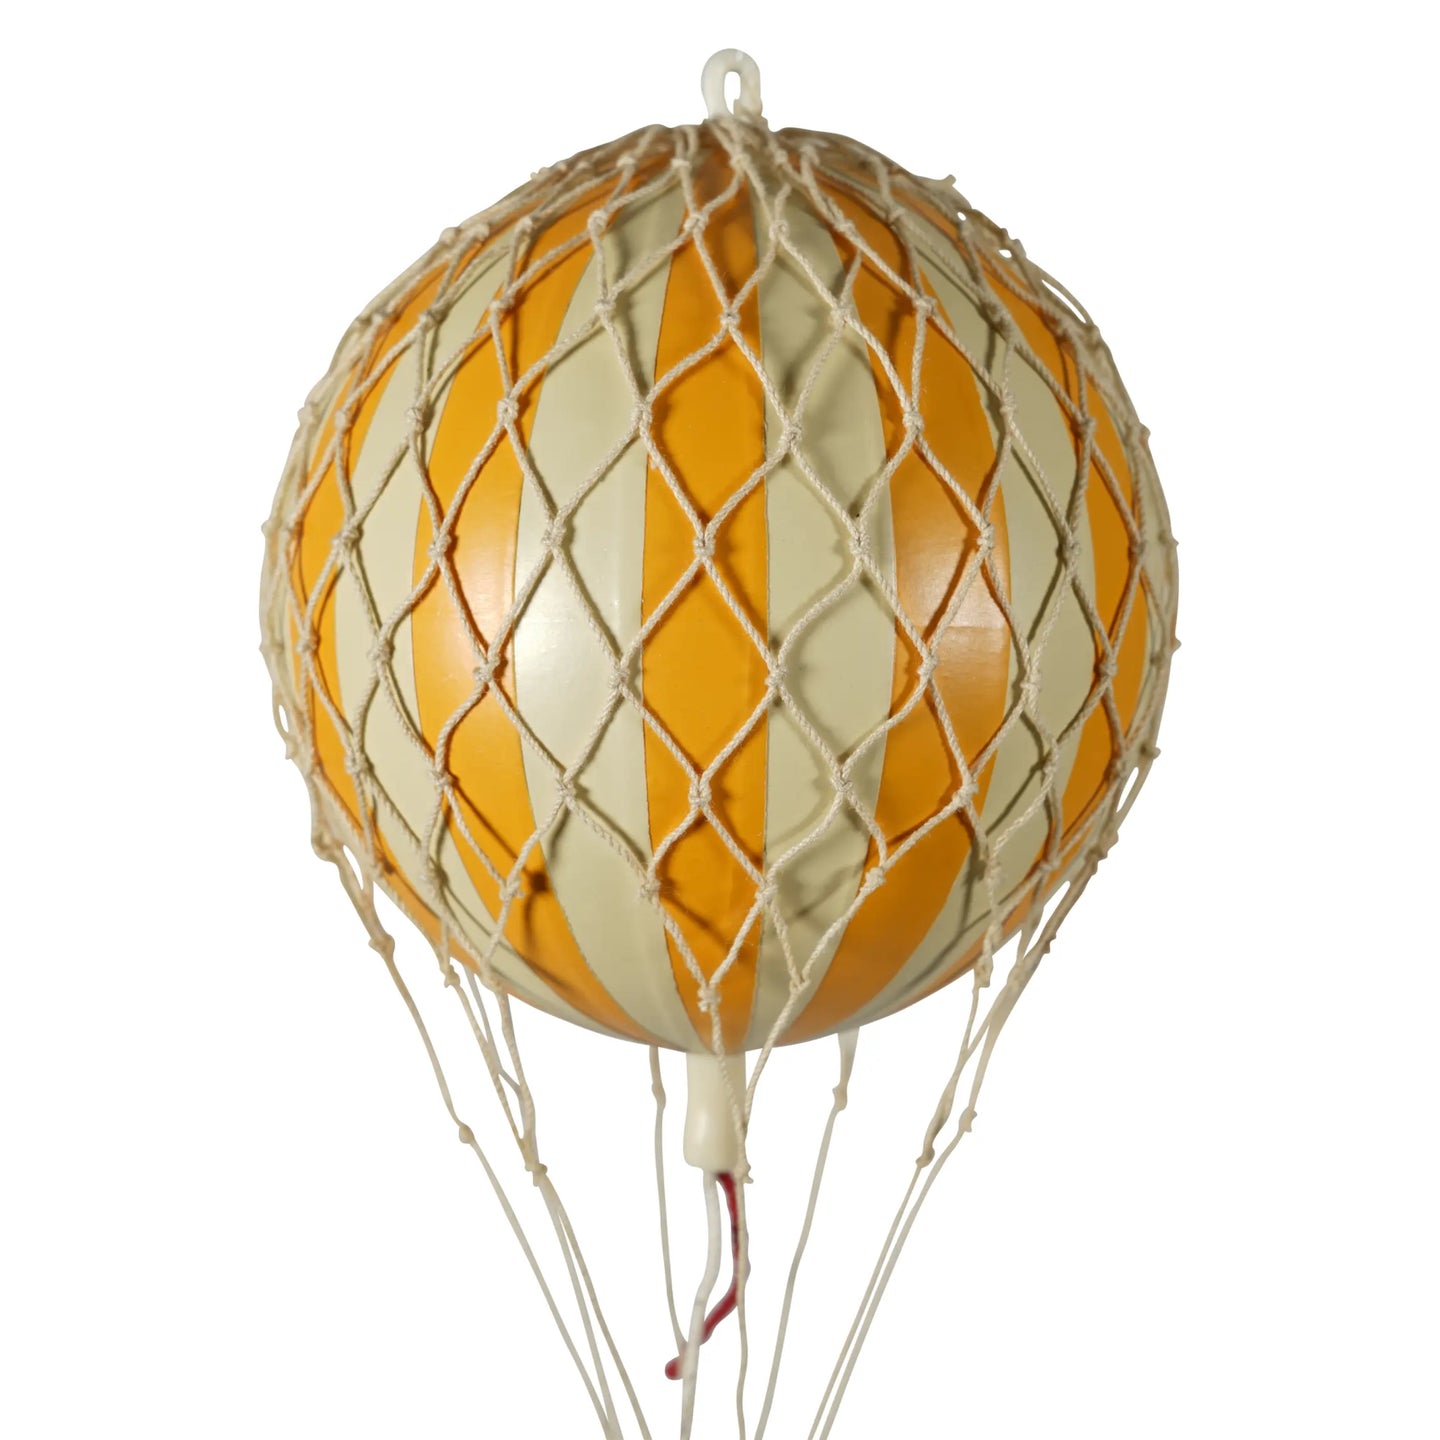 Authentic Models Floating The Skies Air Balloon 5.12 x 3.35 in, Orange / Ivory - AP160O